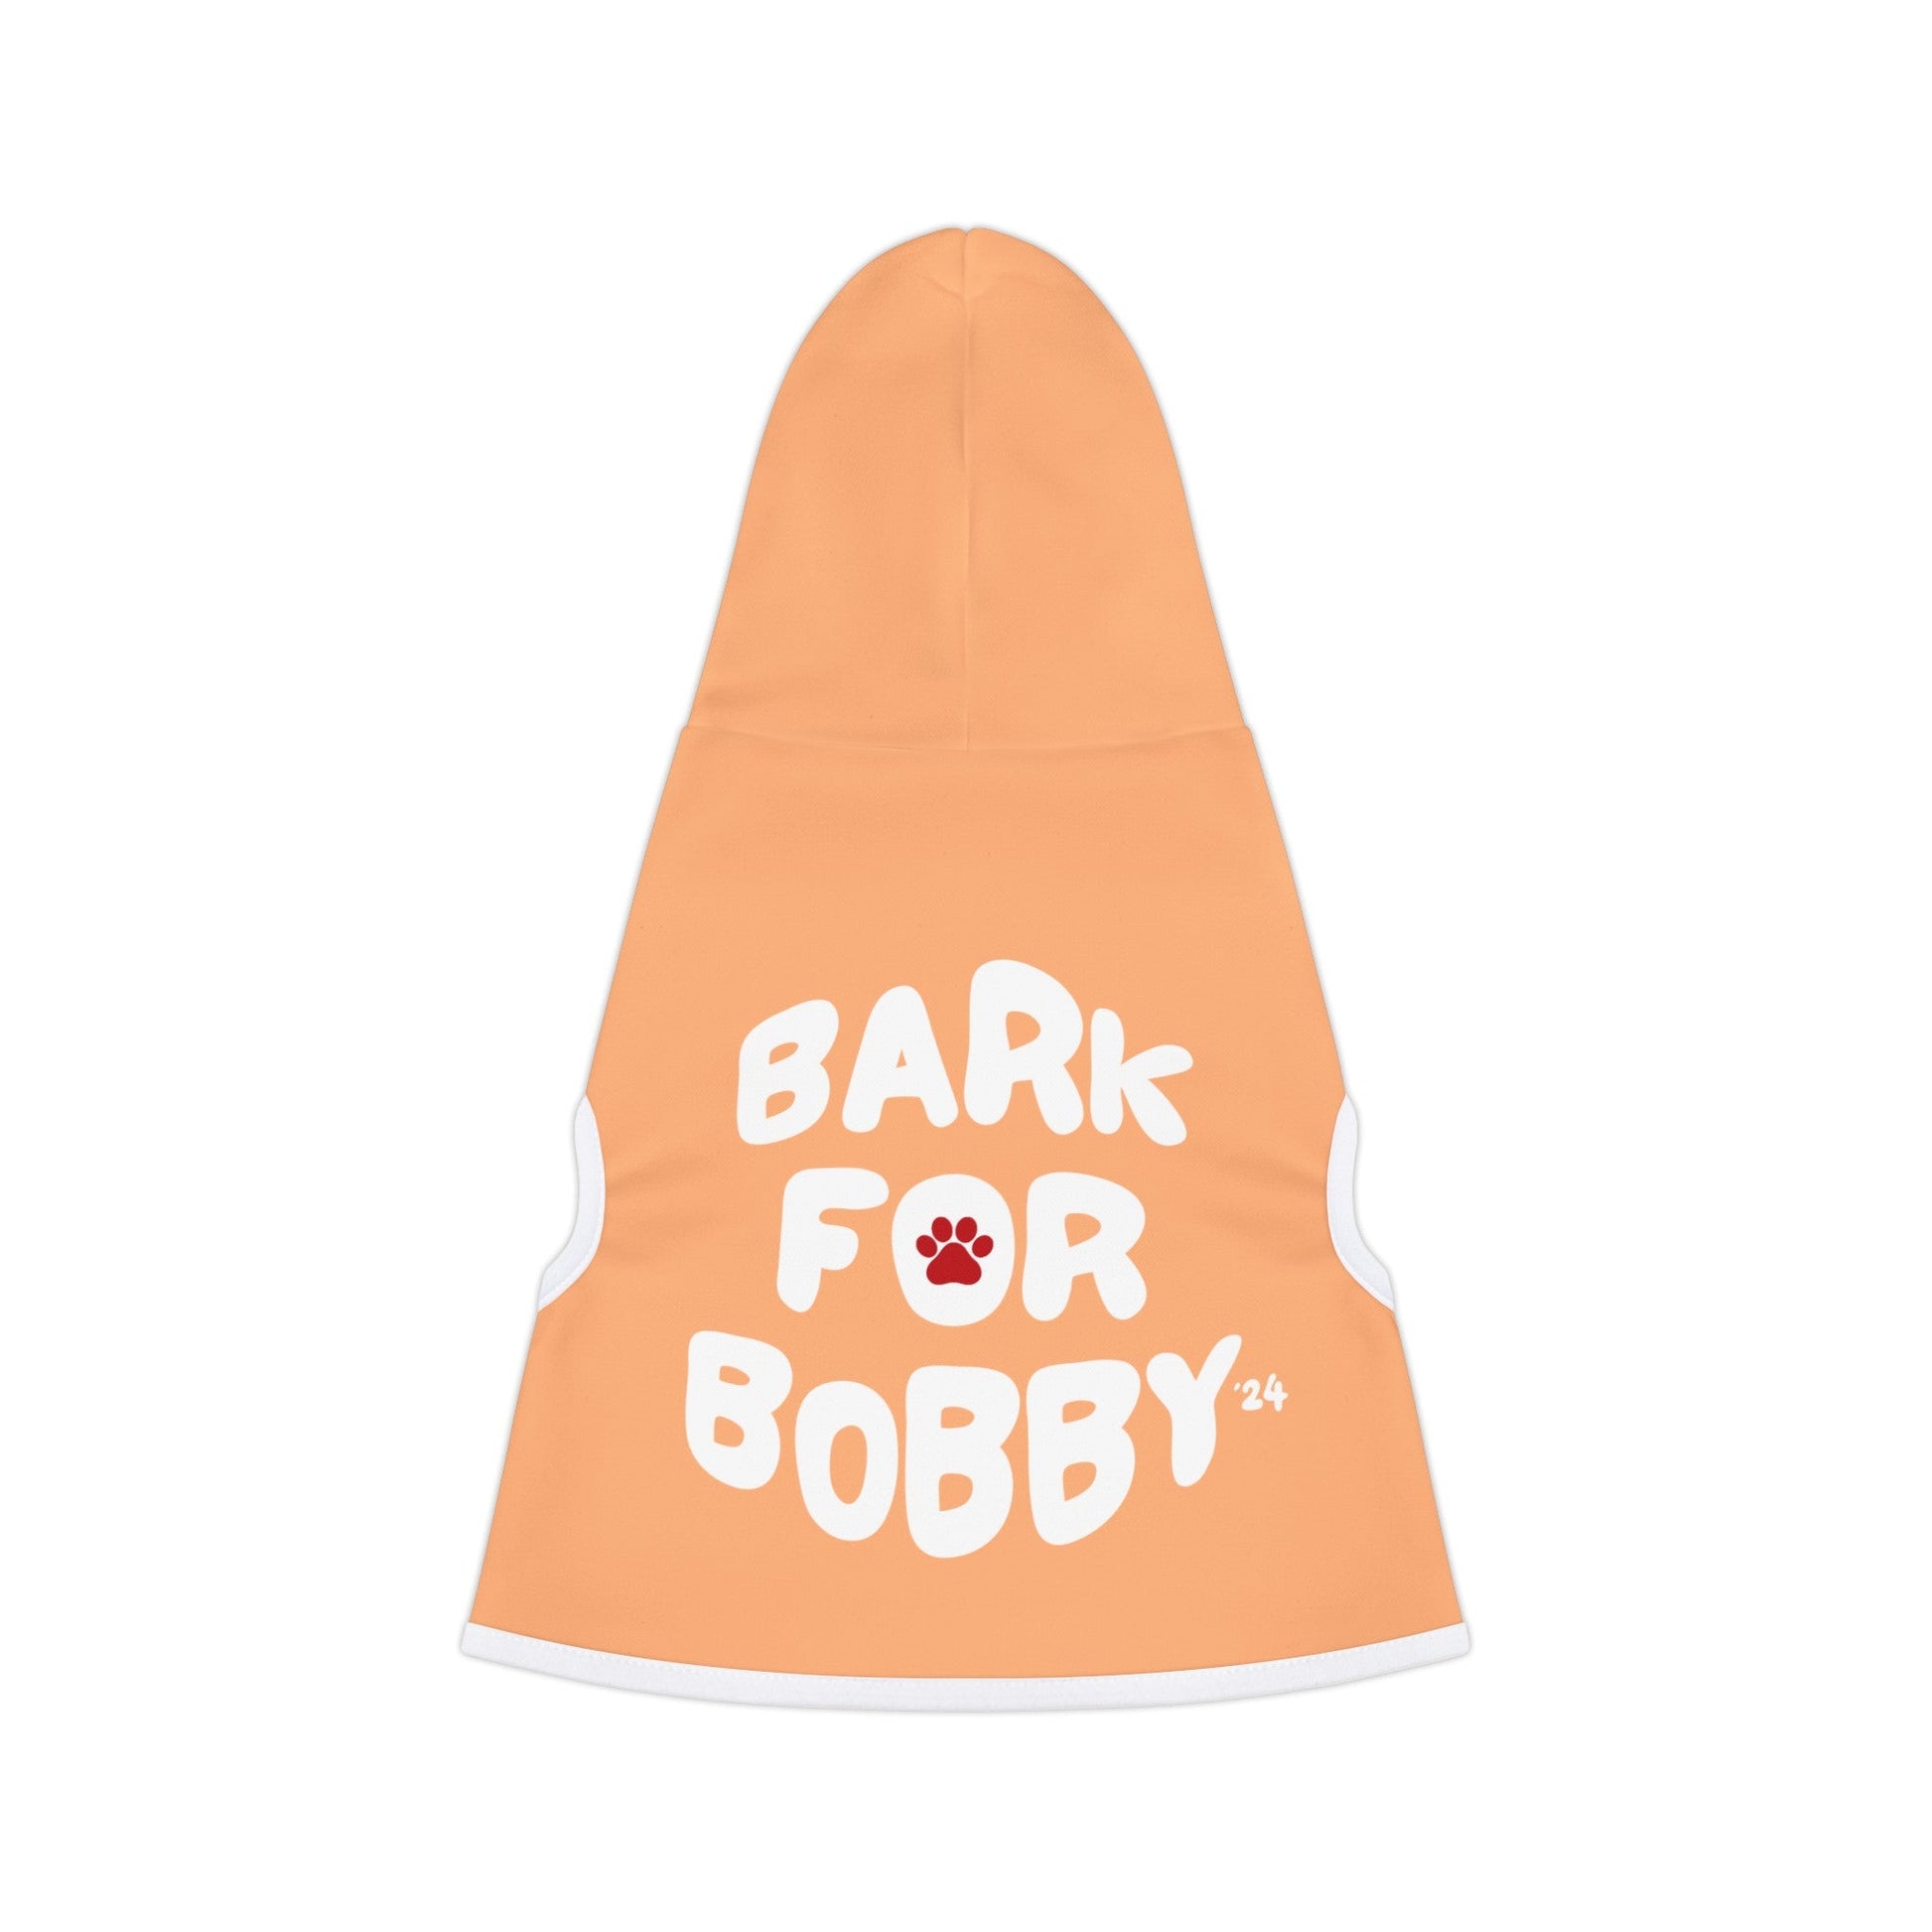 Bark for Bobby Pet Hoodie in Orange - TEAM KENNEDY. All rights reserved